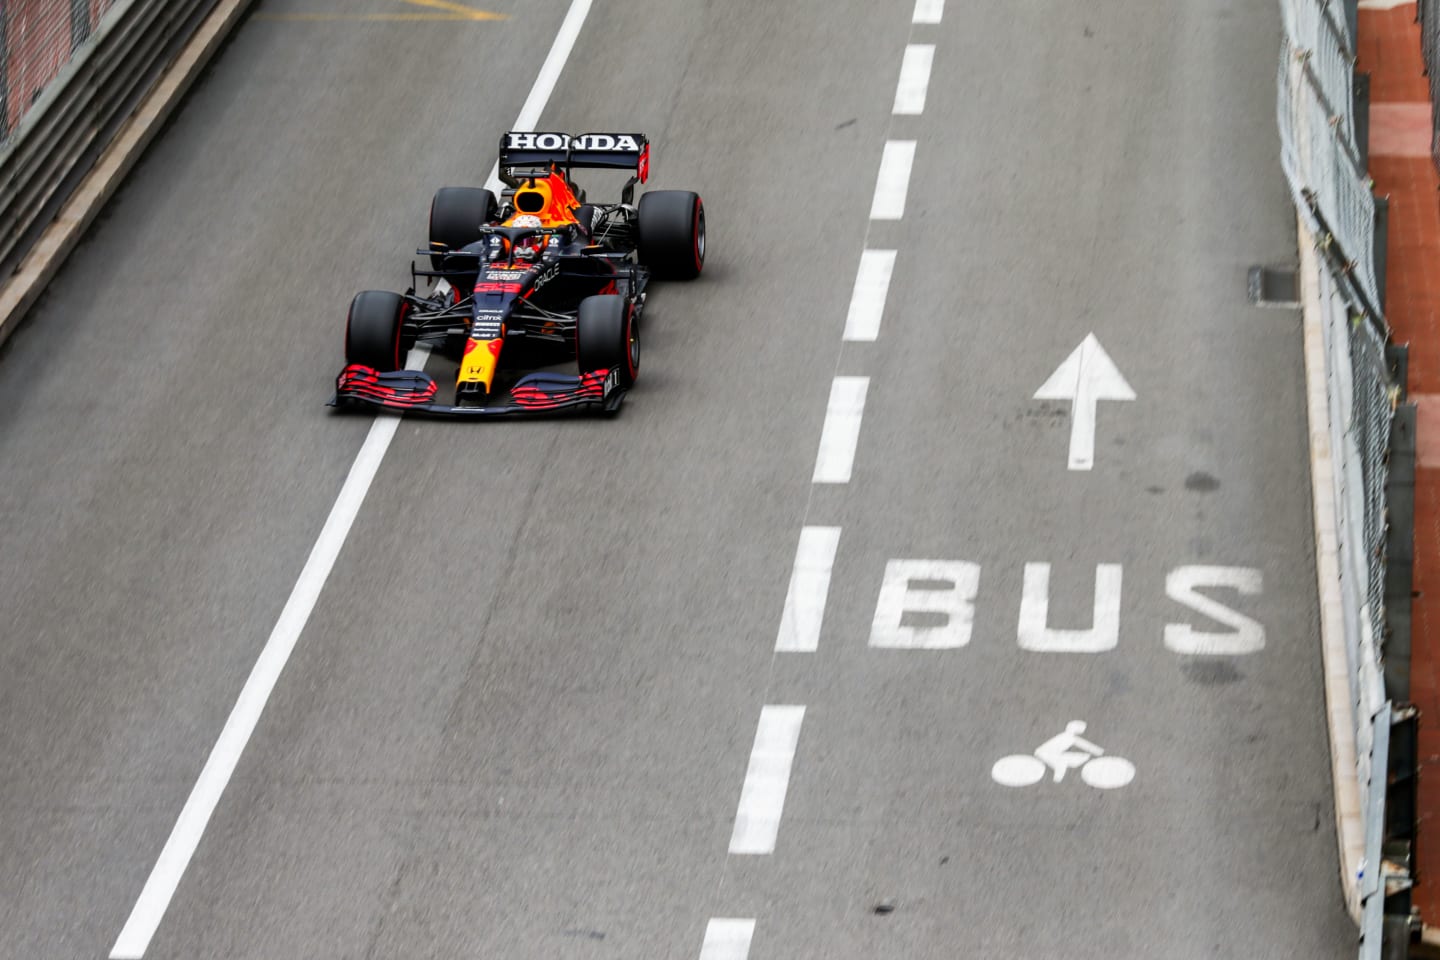 MONTE-CARLO, MONACO - MAY 22: Max Verstappen of Red Bull Racing and The Netherlands  during practice/qualifying ahead of the F1 Grand Prix of Monaco at Circuit de Monaco on May 22, 2021 in Monte-Carlo, Monaco. (Photo by Peter Fox/Getty Images)